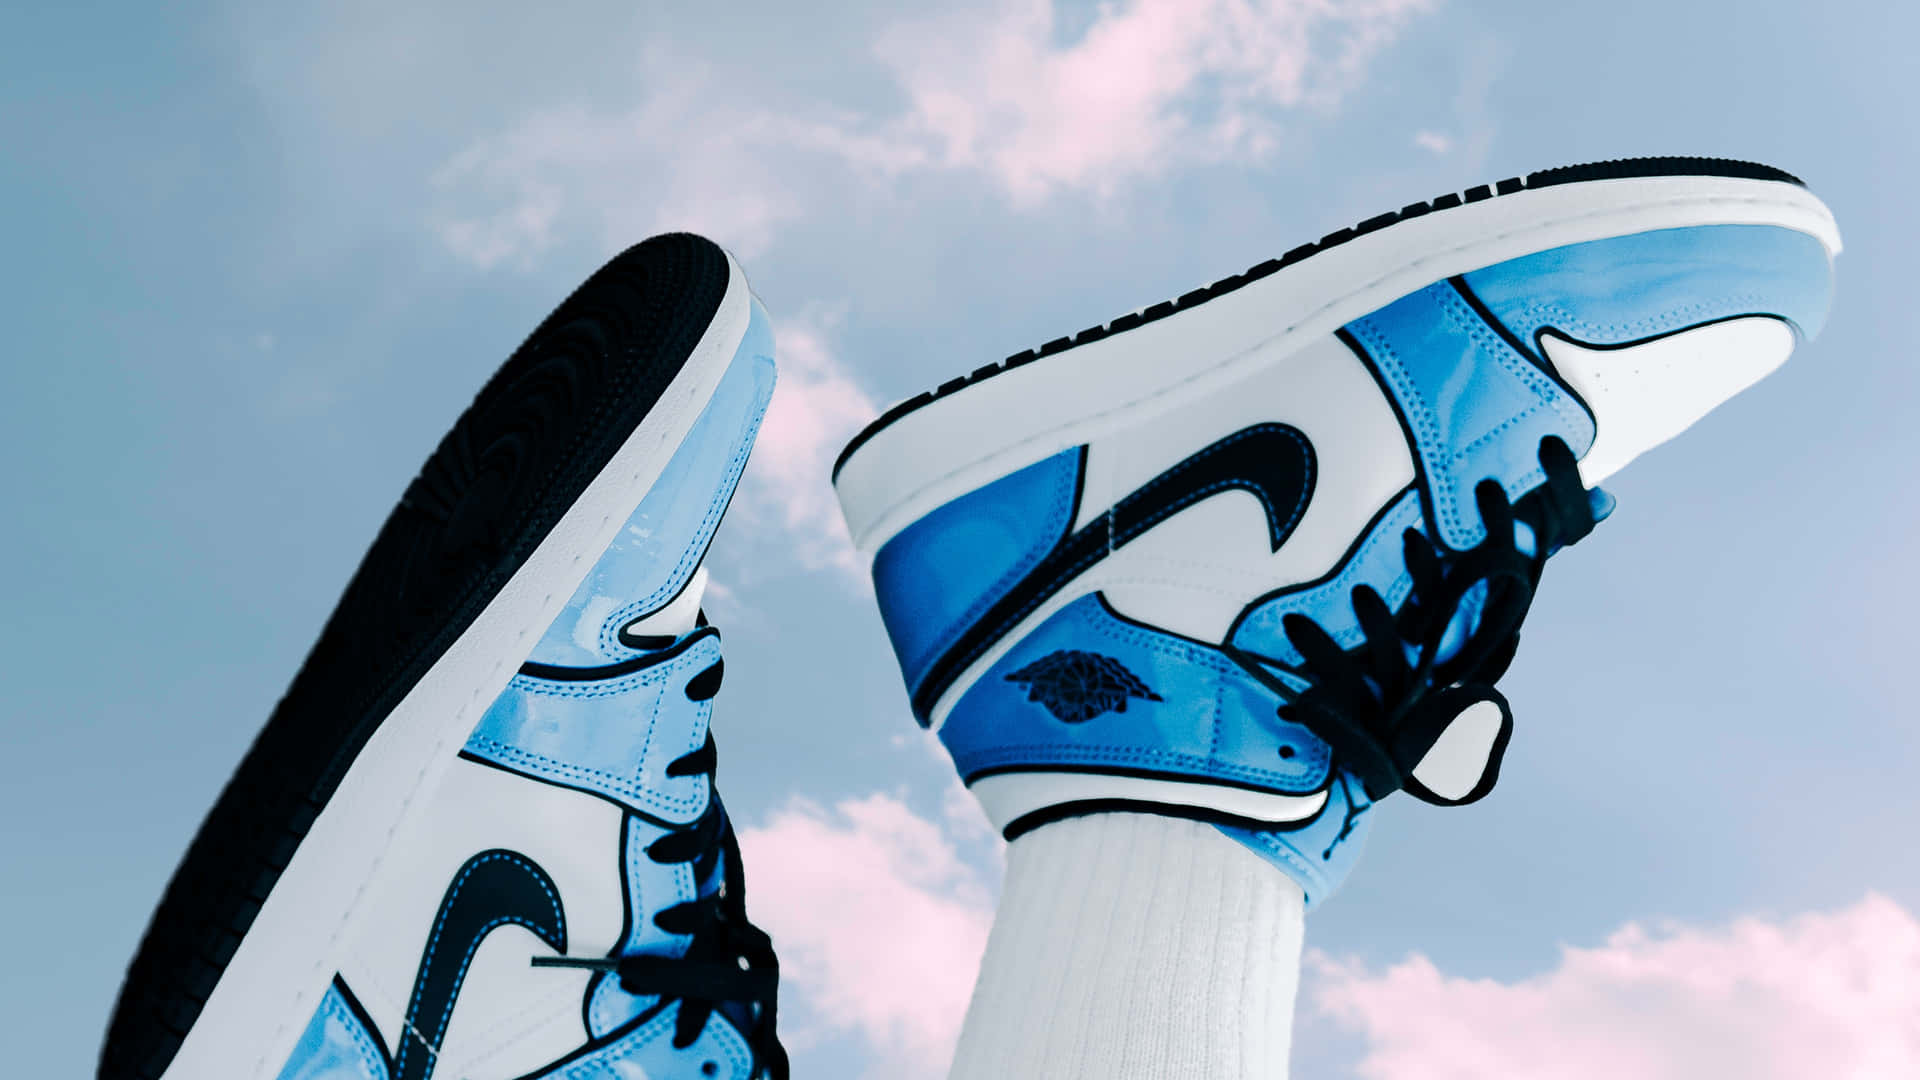 A Pair Of Blue And White Sneakers With Clouds In The Sky Wallpaper